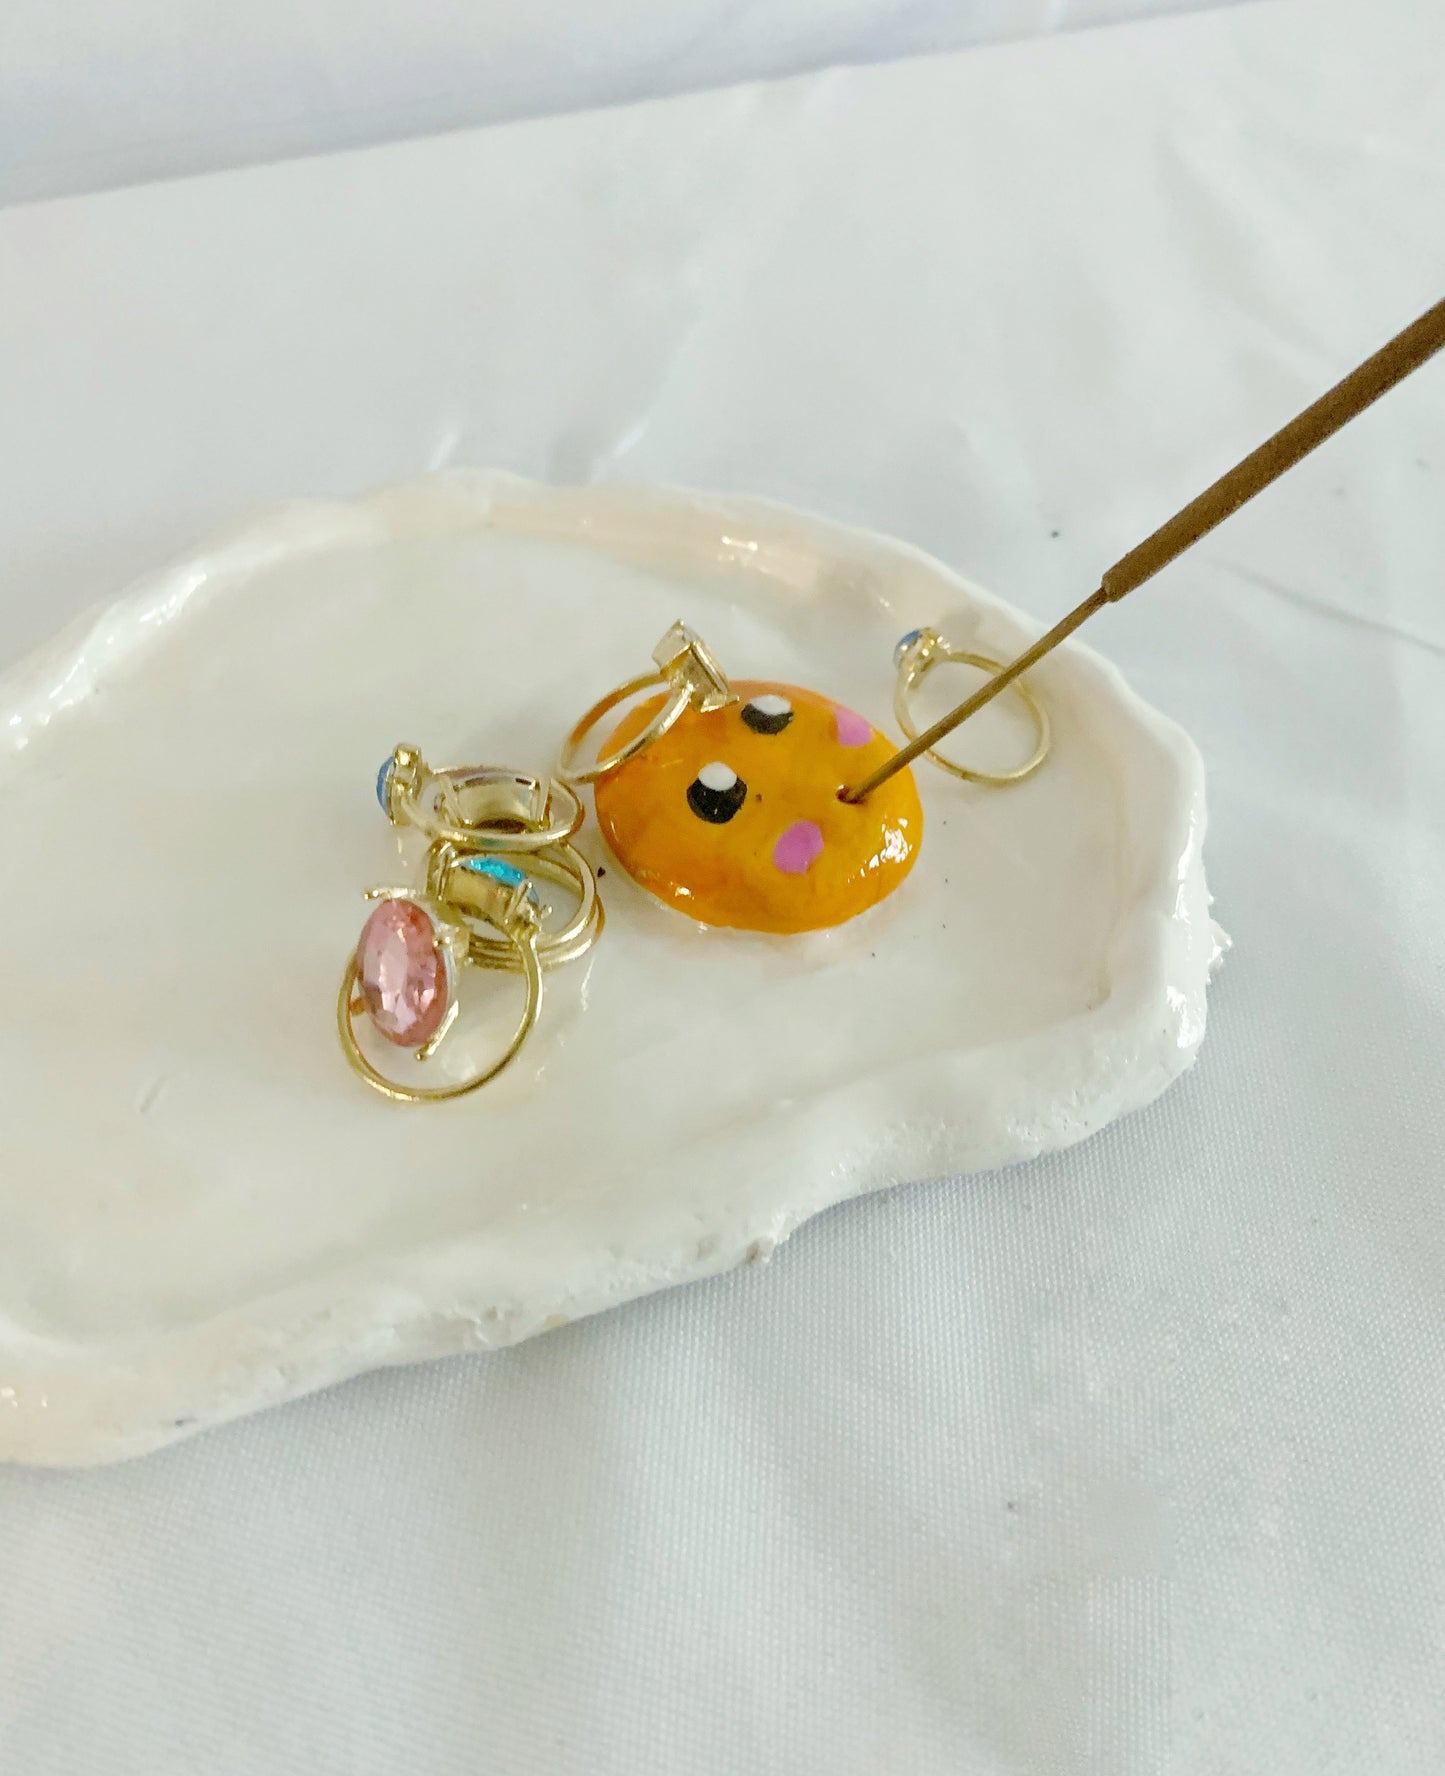 Egg Incense holder and Clay Trinket fish